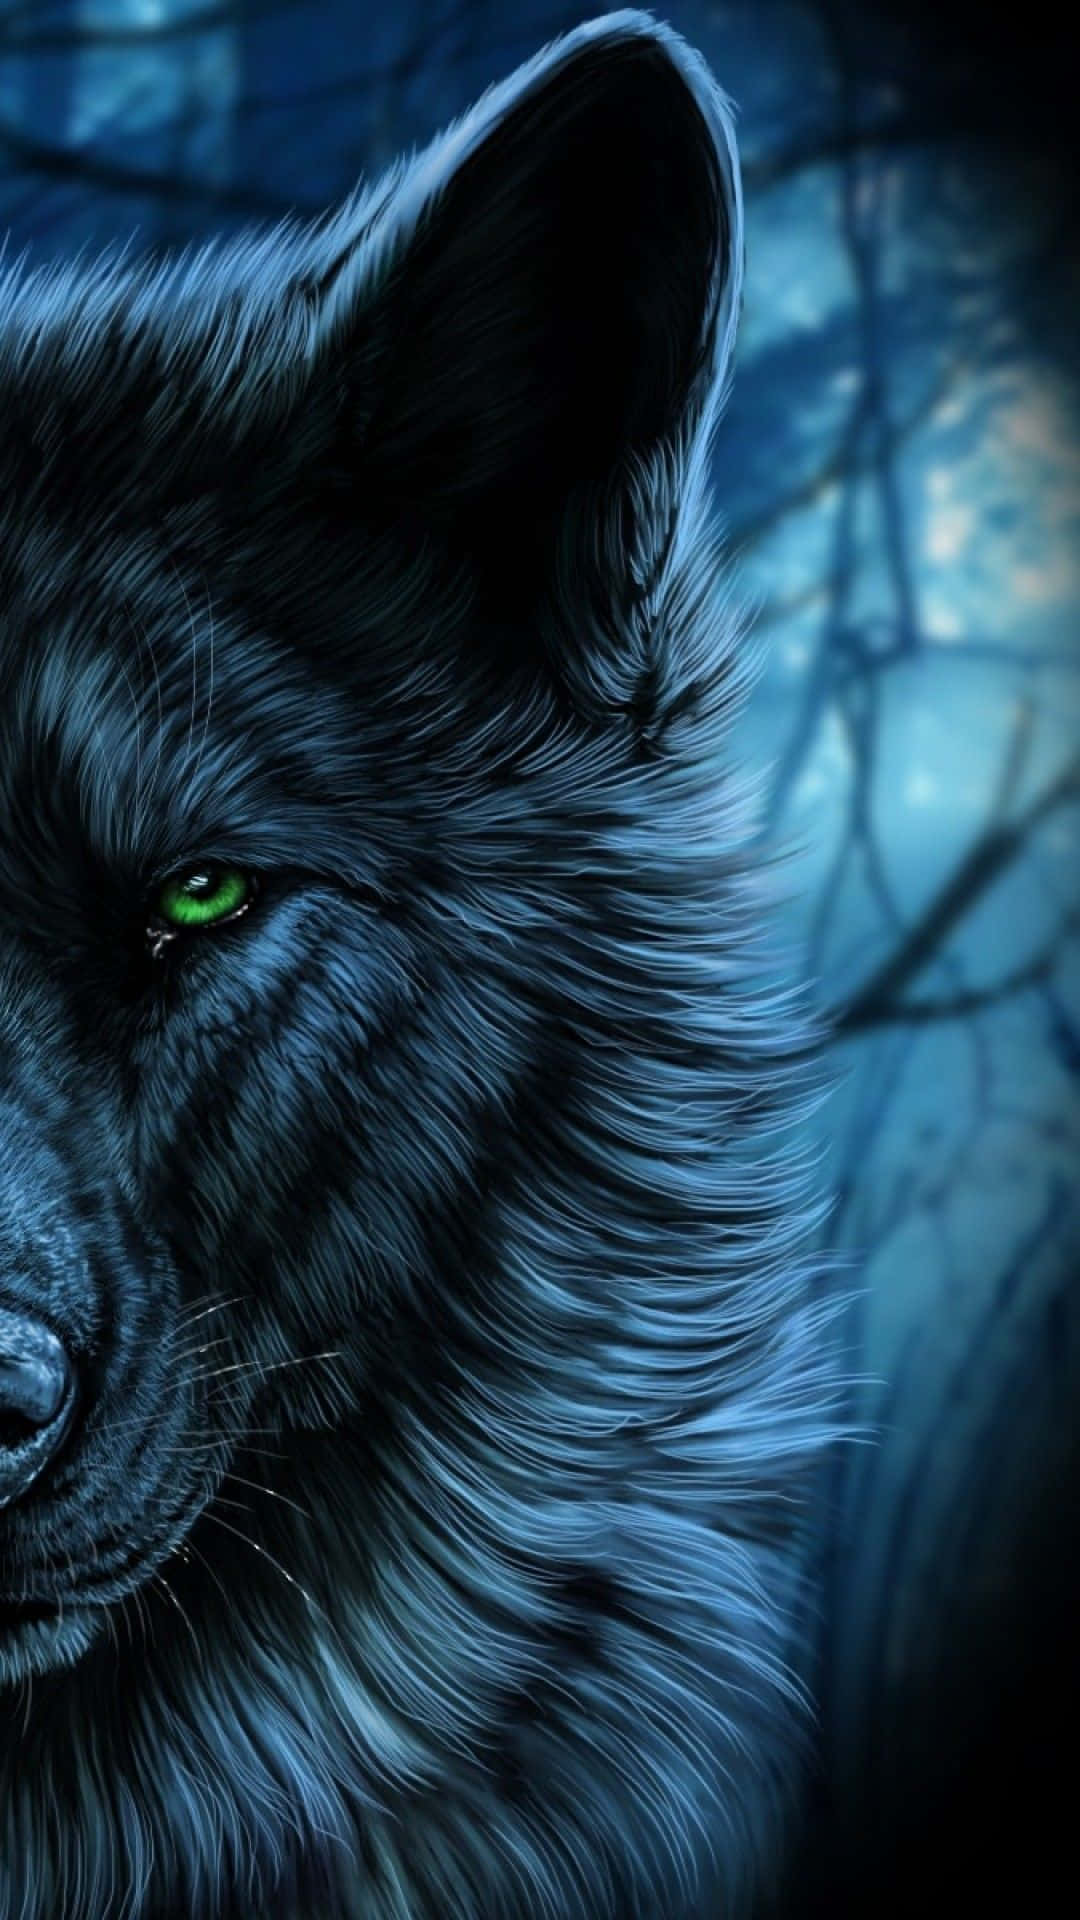 An Intriguing Iphone Wallpaper with a Wolf Image Wallpaper